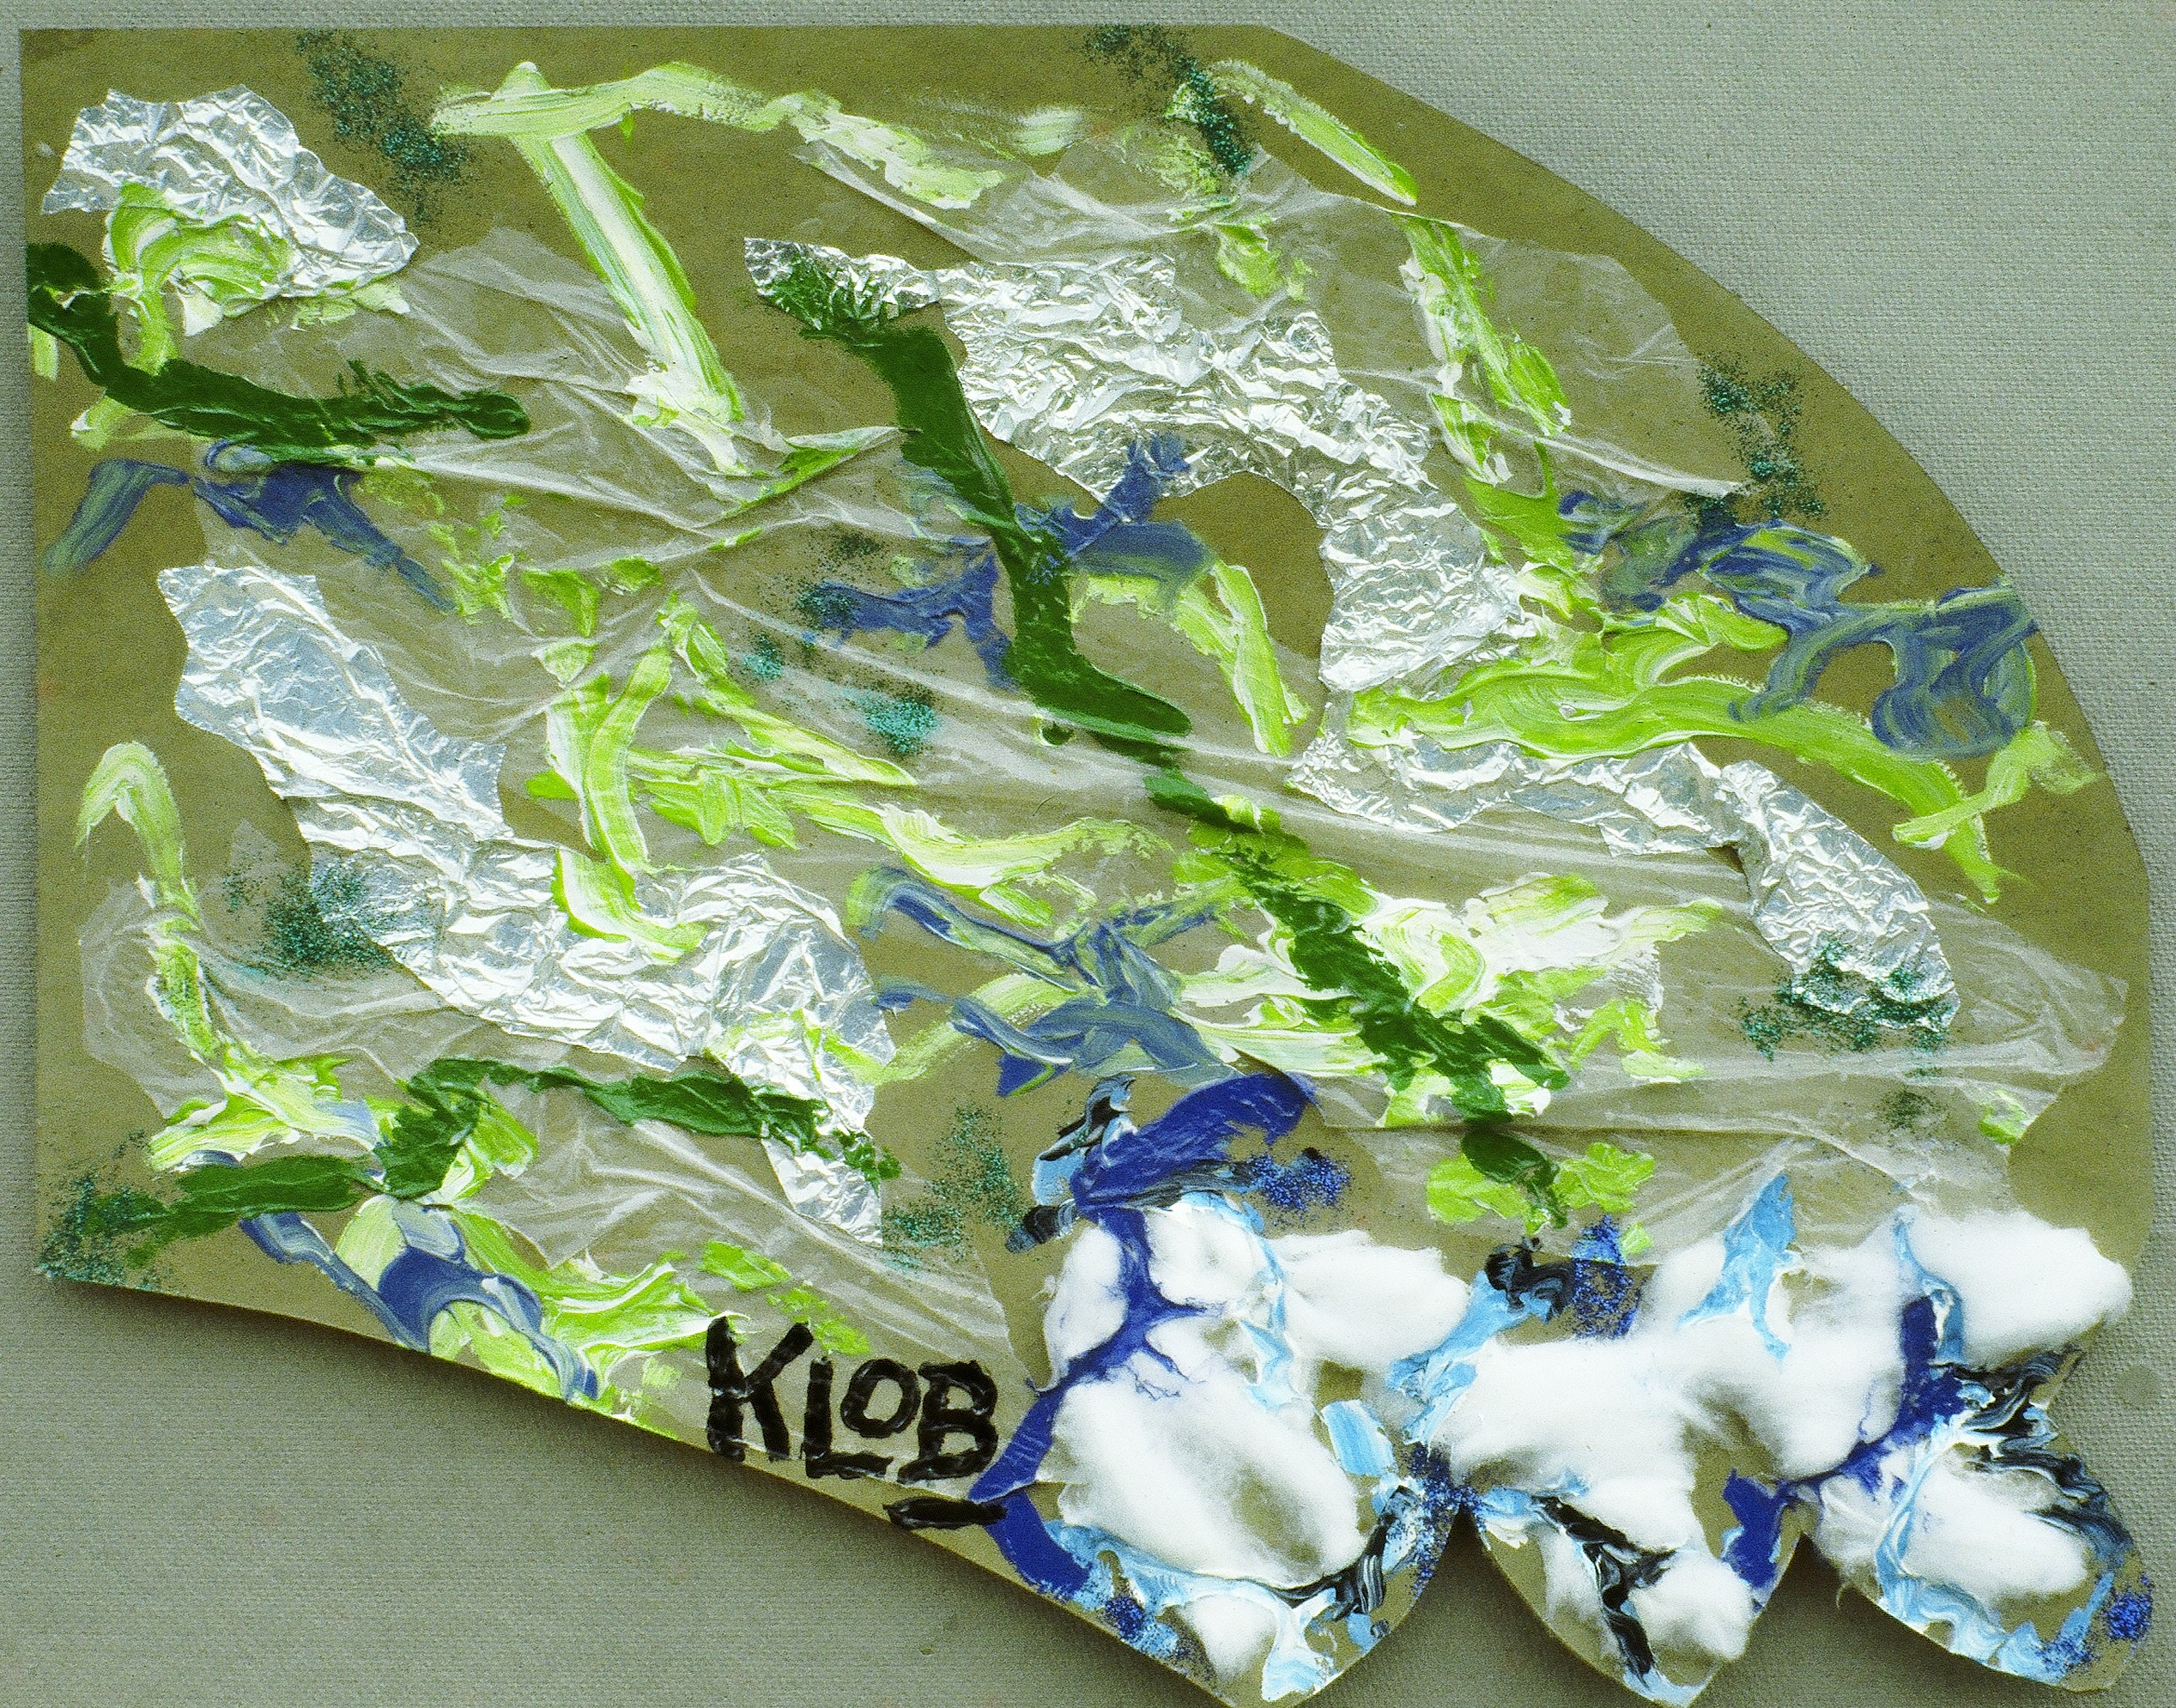 1979; acrylic, wax paper, aluminum foil, cotton; 24 in X 36 in